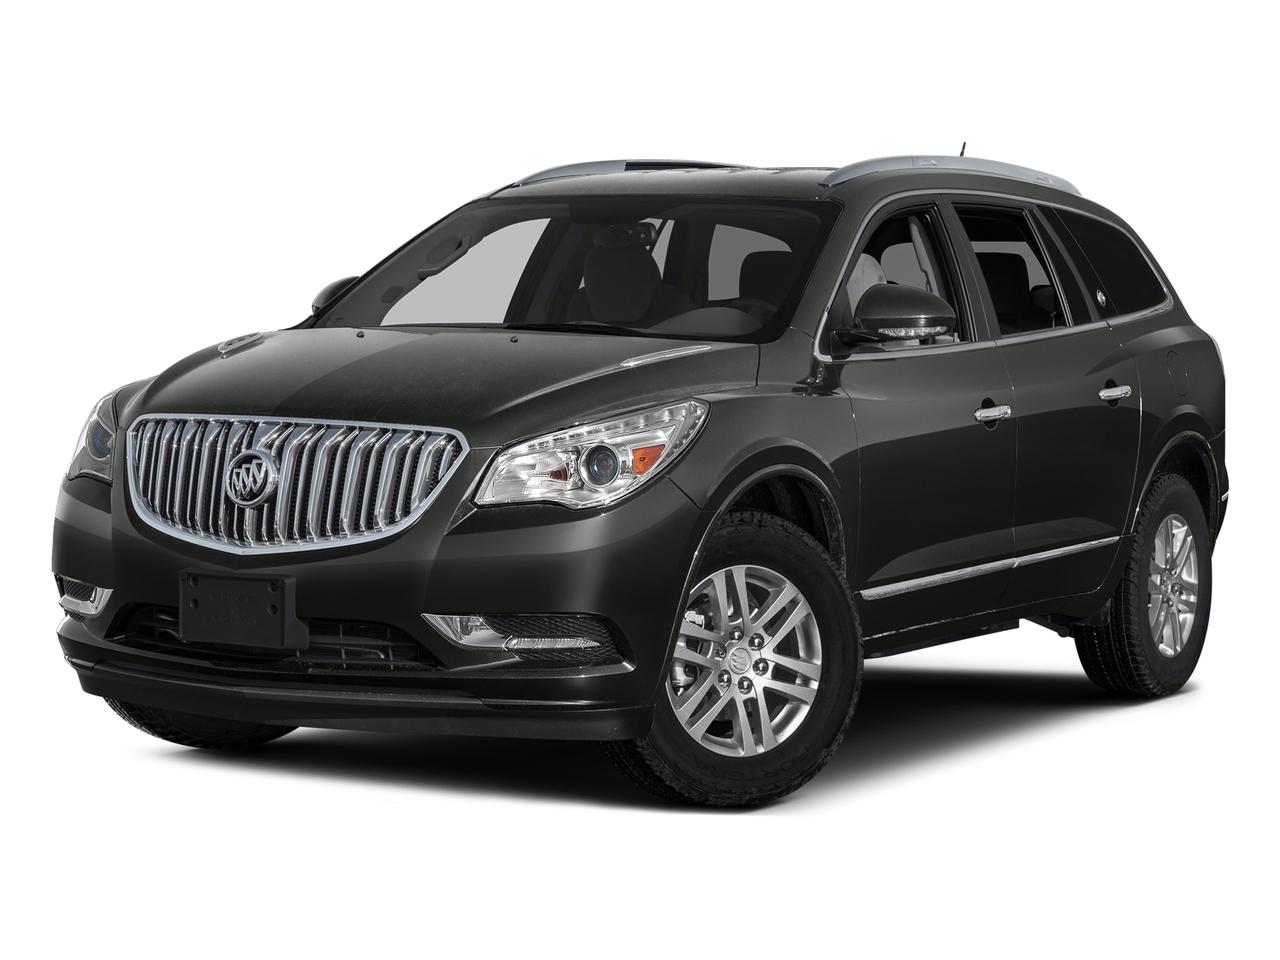 2017 Buick Enclave Vehicle Photo in Peoria, IL 61615